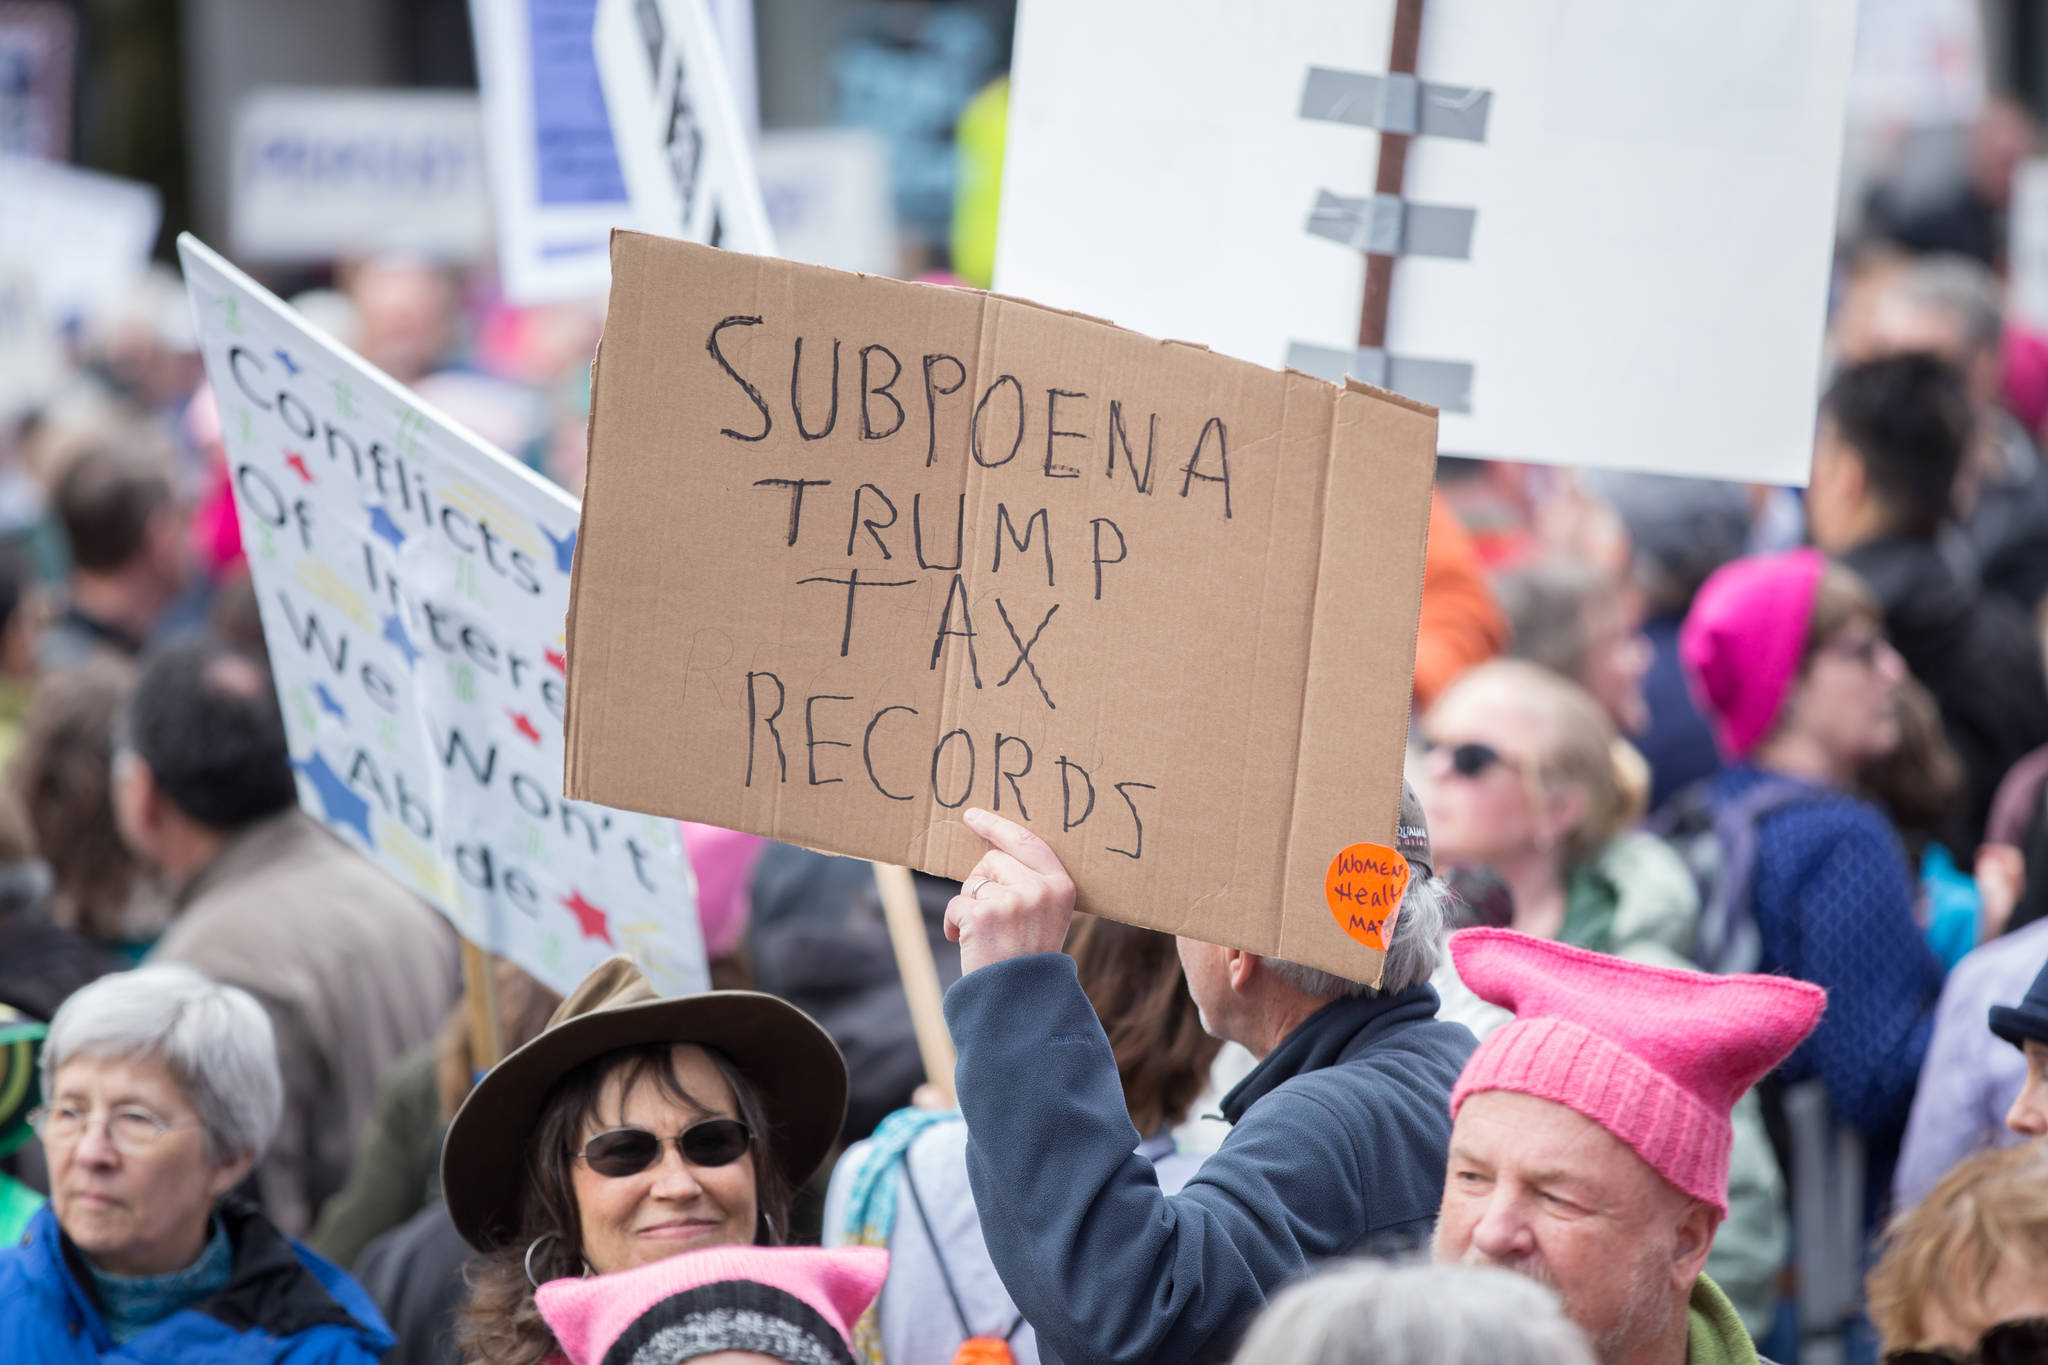 ‘We Care and We’re Aware’: More than 1,000 March Demanding Trump’s Tax Returns